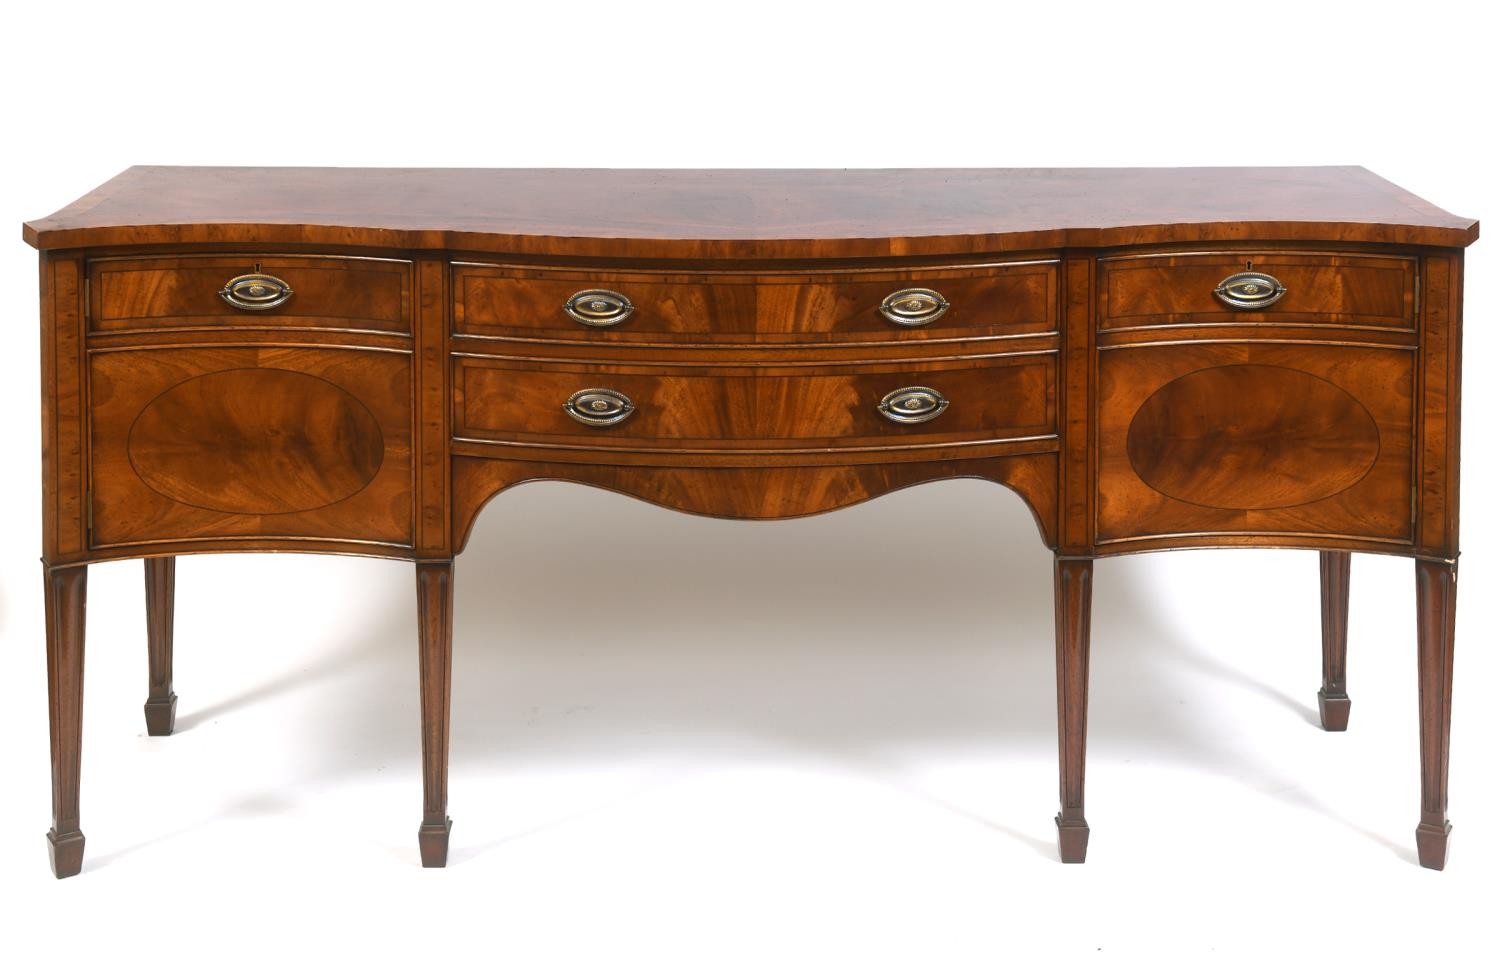 A George III style mahogany serpentine sideboard, having two central drawers flanked by a single